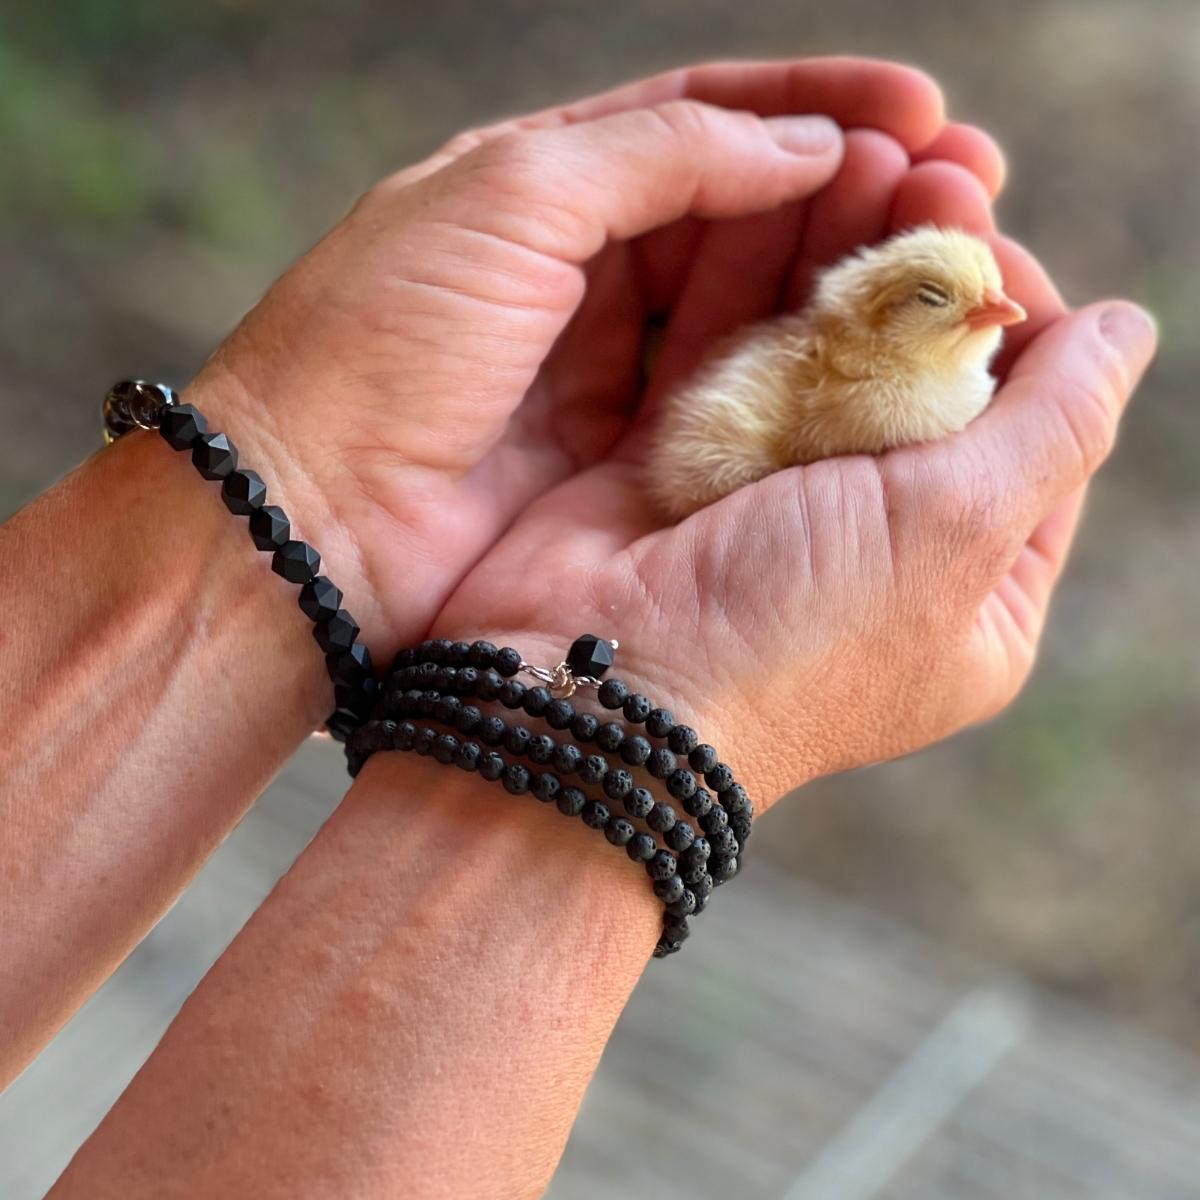 Whether you're looking to enhance your mindfulness practices, ground your energy, or make a statement with a unique piece of jewelry, the Lava Luxe Wrap Bracelet offers a luxurious and empowering option that embodies the harmonious balance of earth's elements.